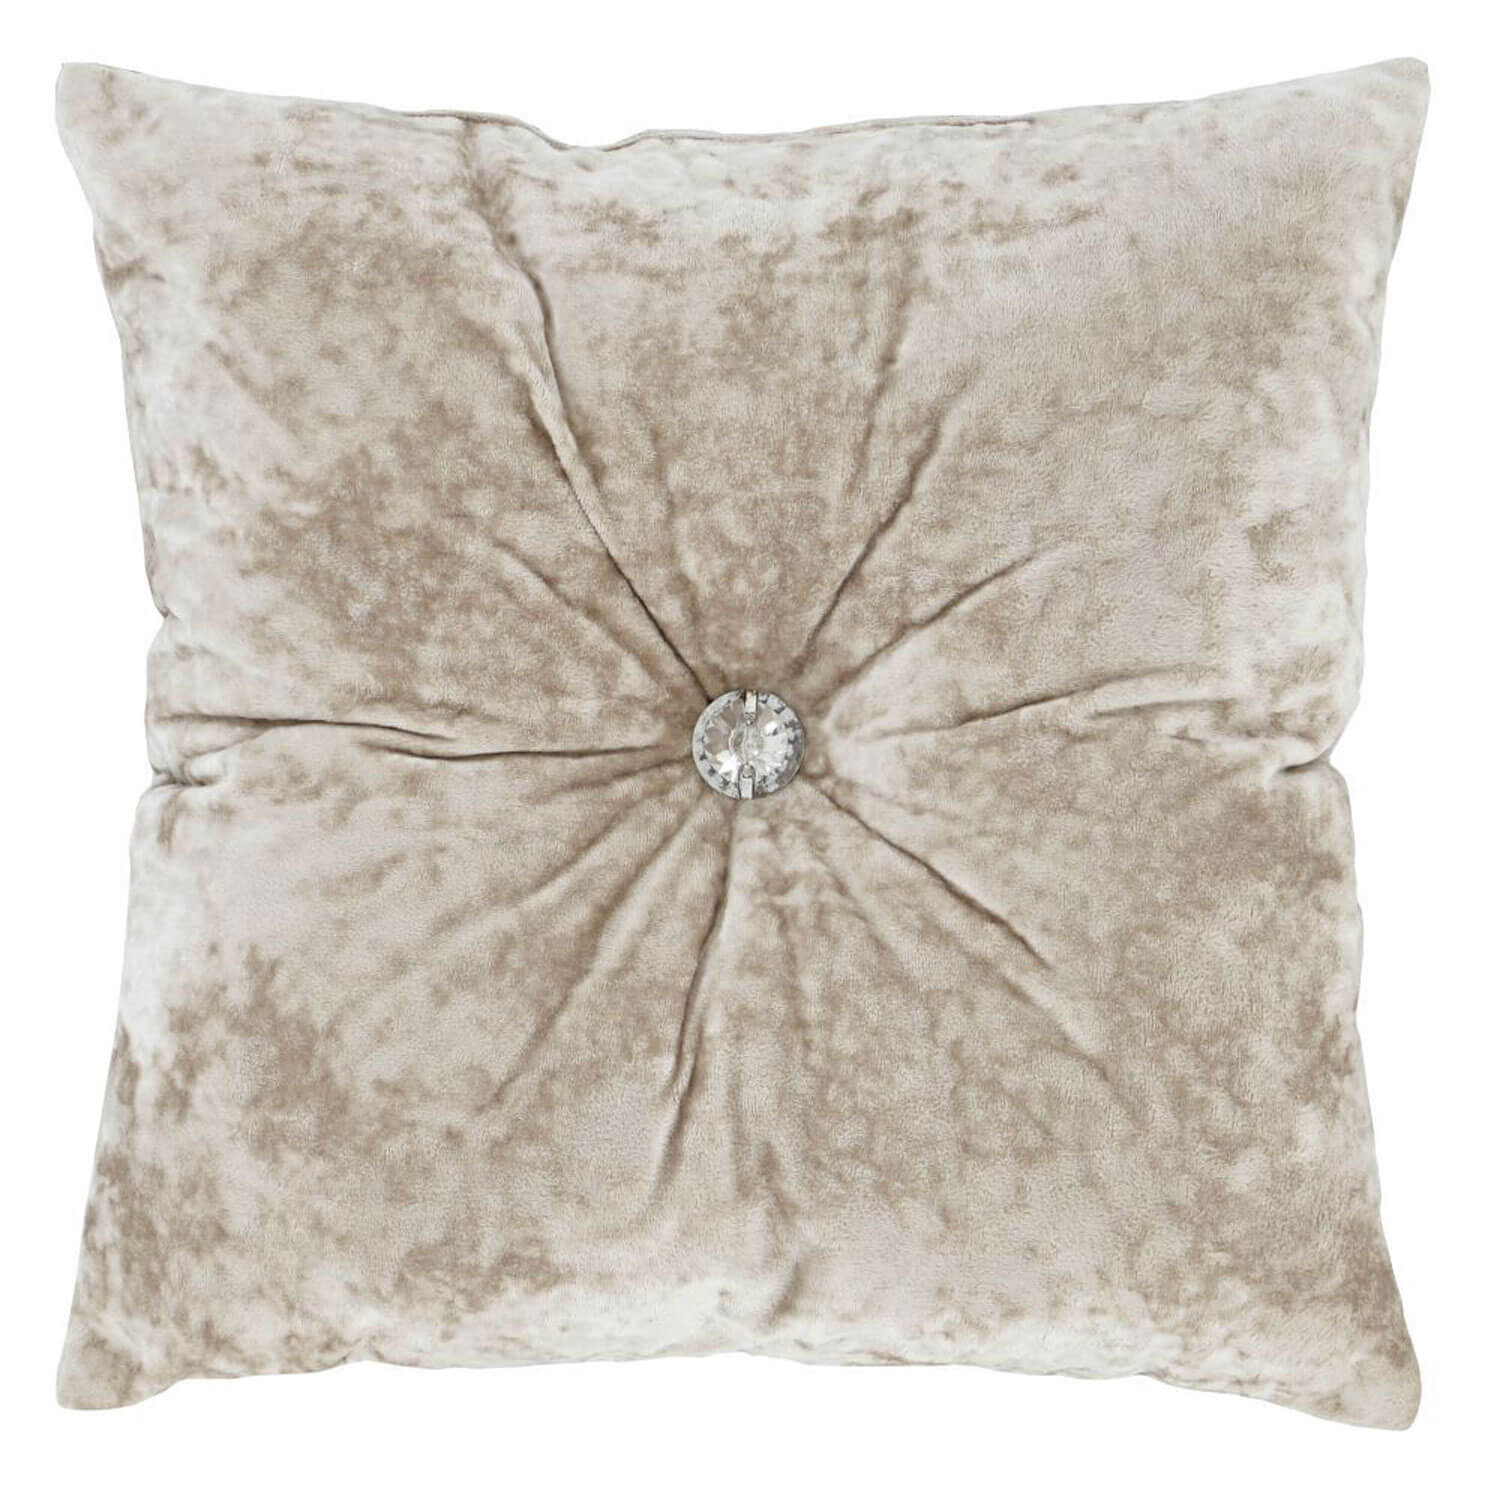 Catherine Lansfield Crushed Velvet Filled Cushion 1 Shaws Department Stores